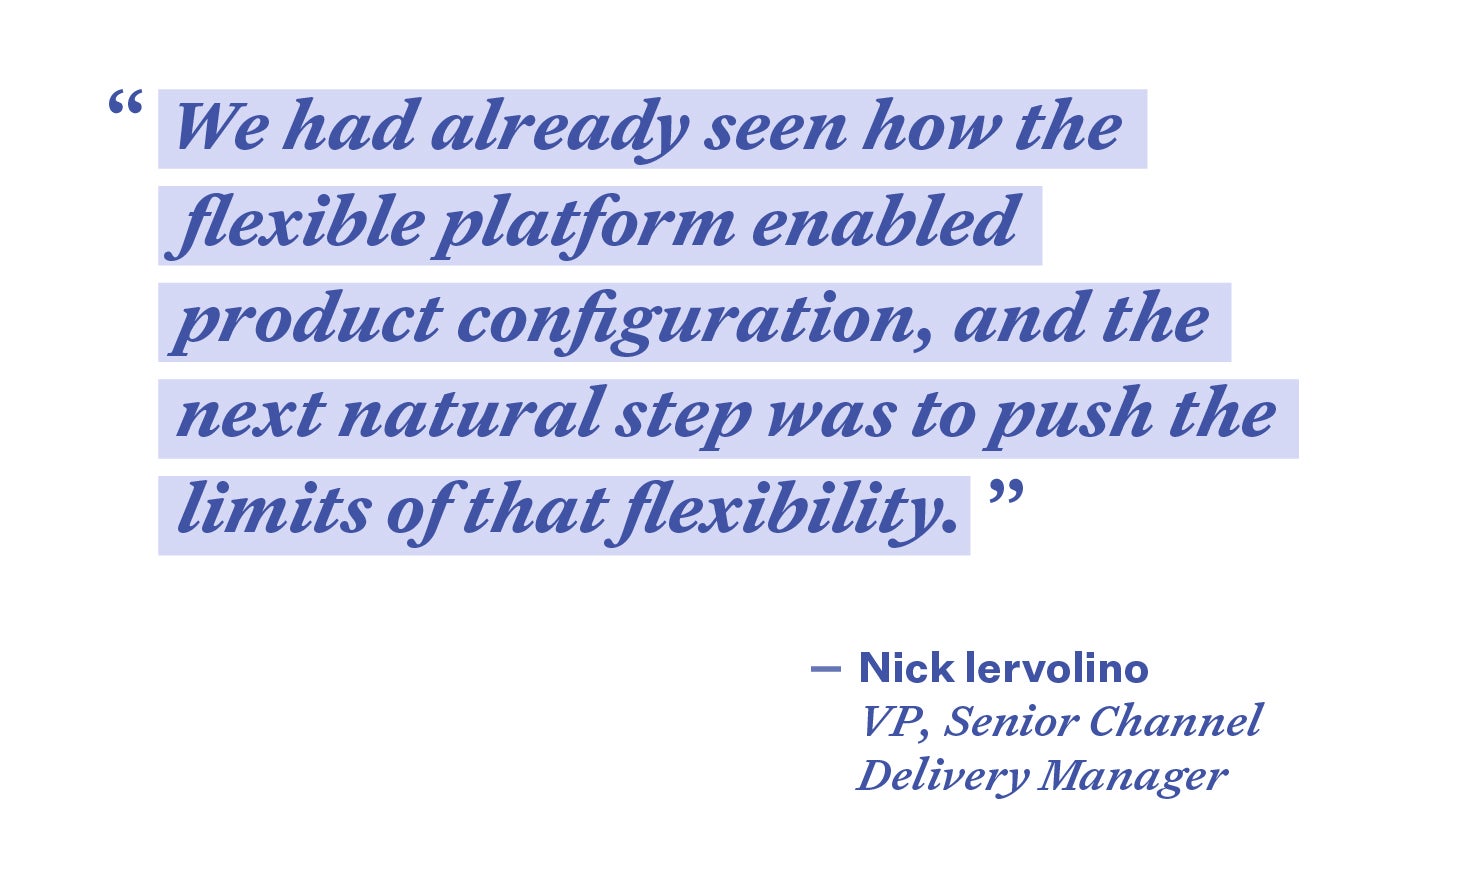 Quote that reads “We had already seen how the flexible platform enabled product configuration, and the next natural step was to push the limits of that flexibility” - Nick Iervolino, VP, Senior Channel Delivery Manager 